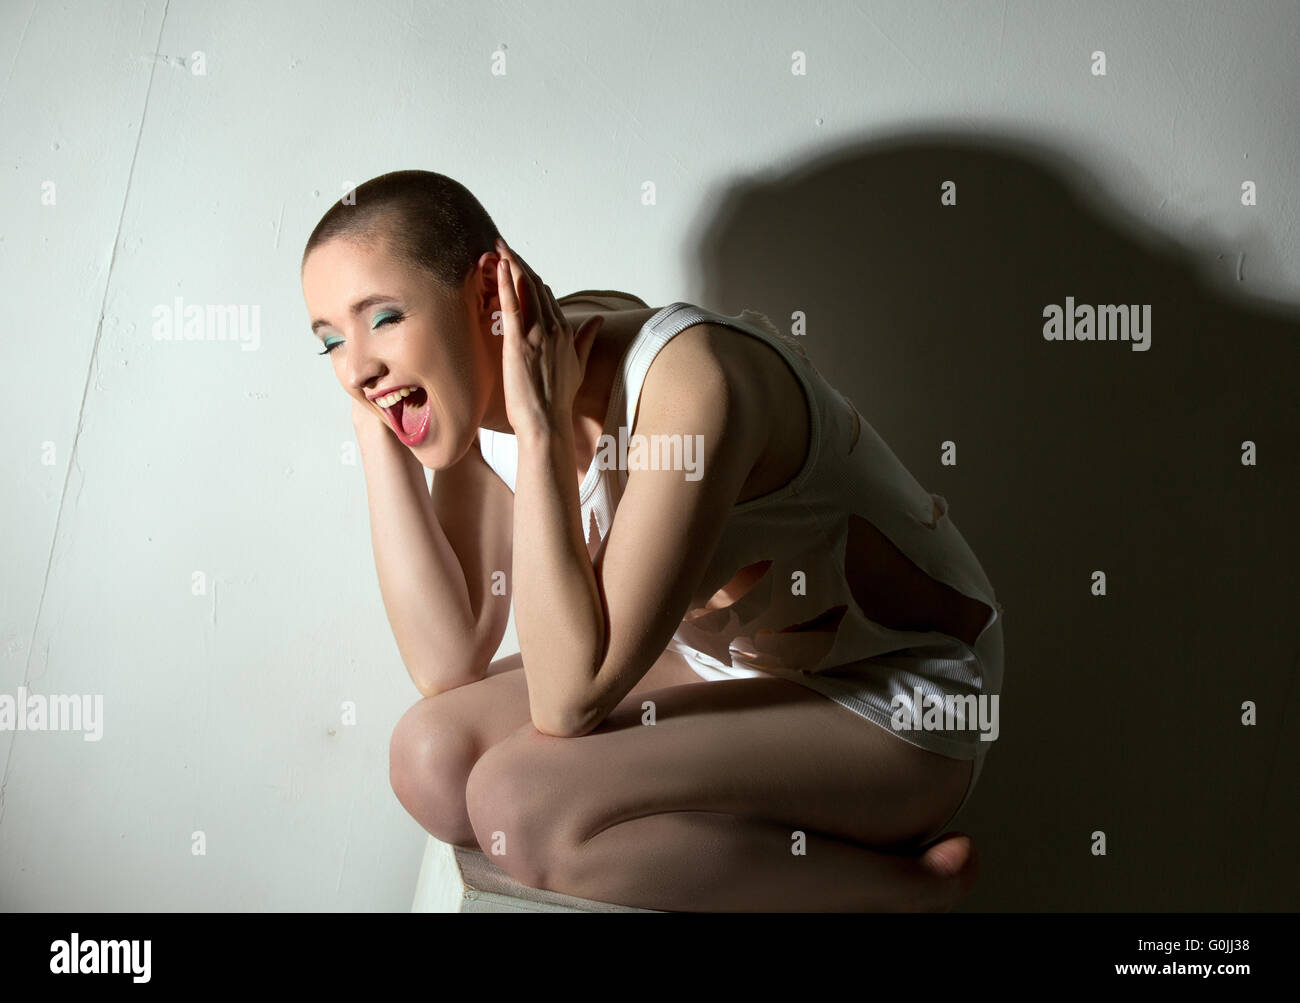 Concept of madness. Skinhead girl screaming Stock Photo